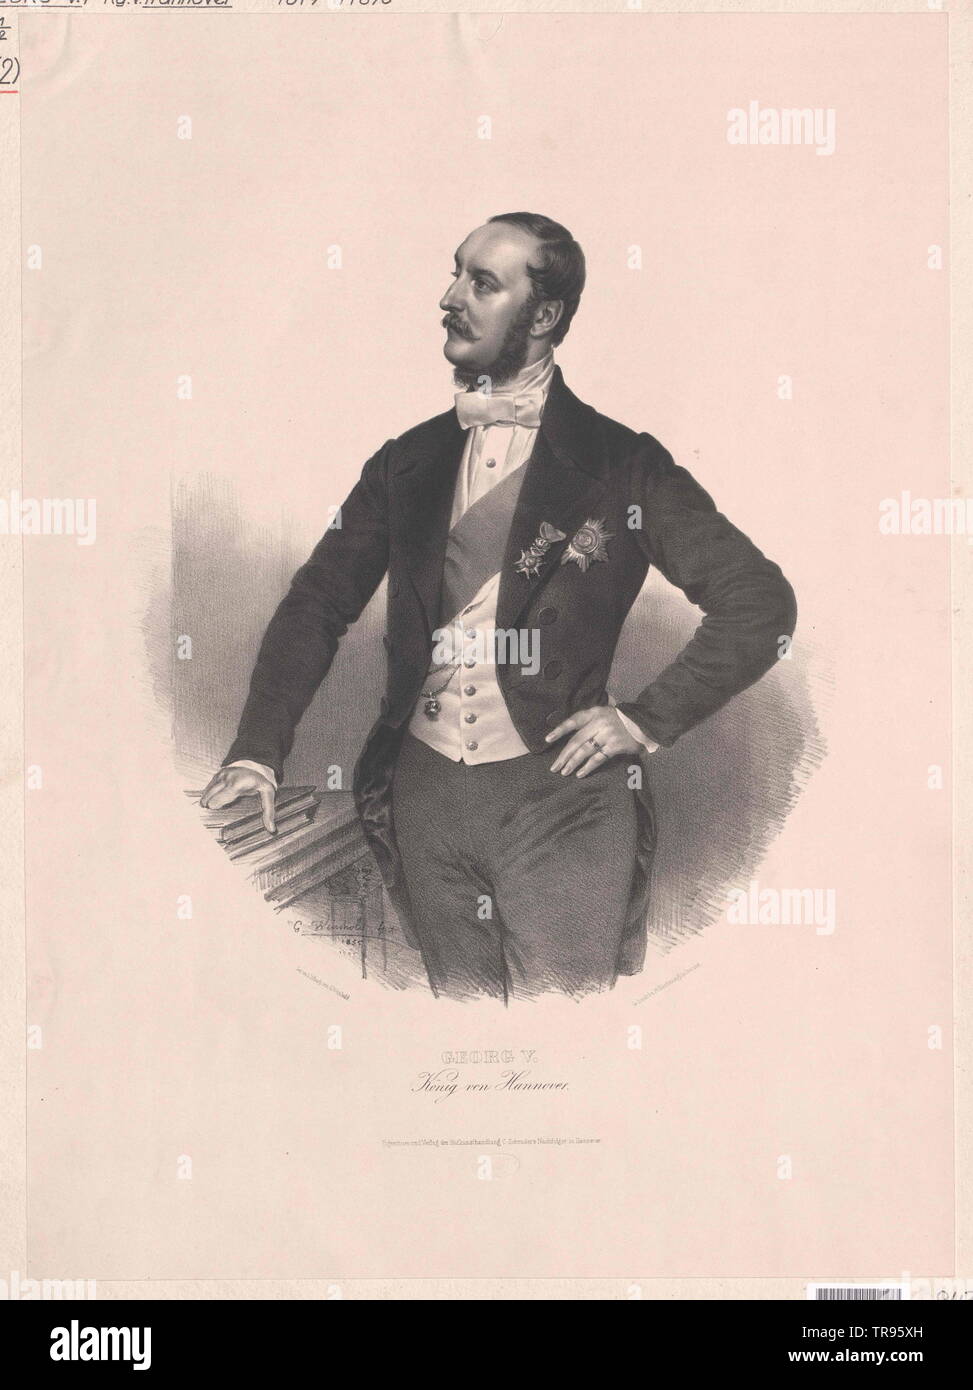 George V., König von Hannover, Additional-Rights - Clearance-Info - Not-Available Stockfoto